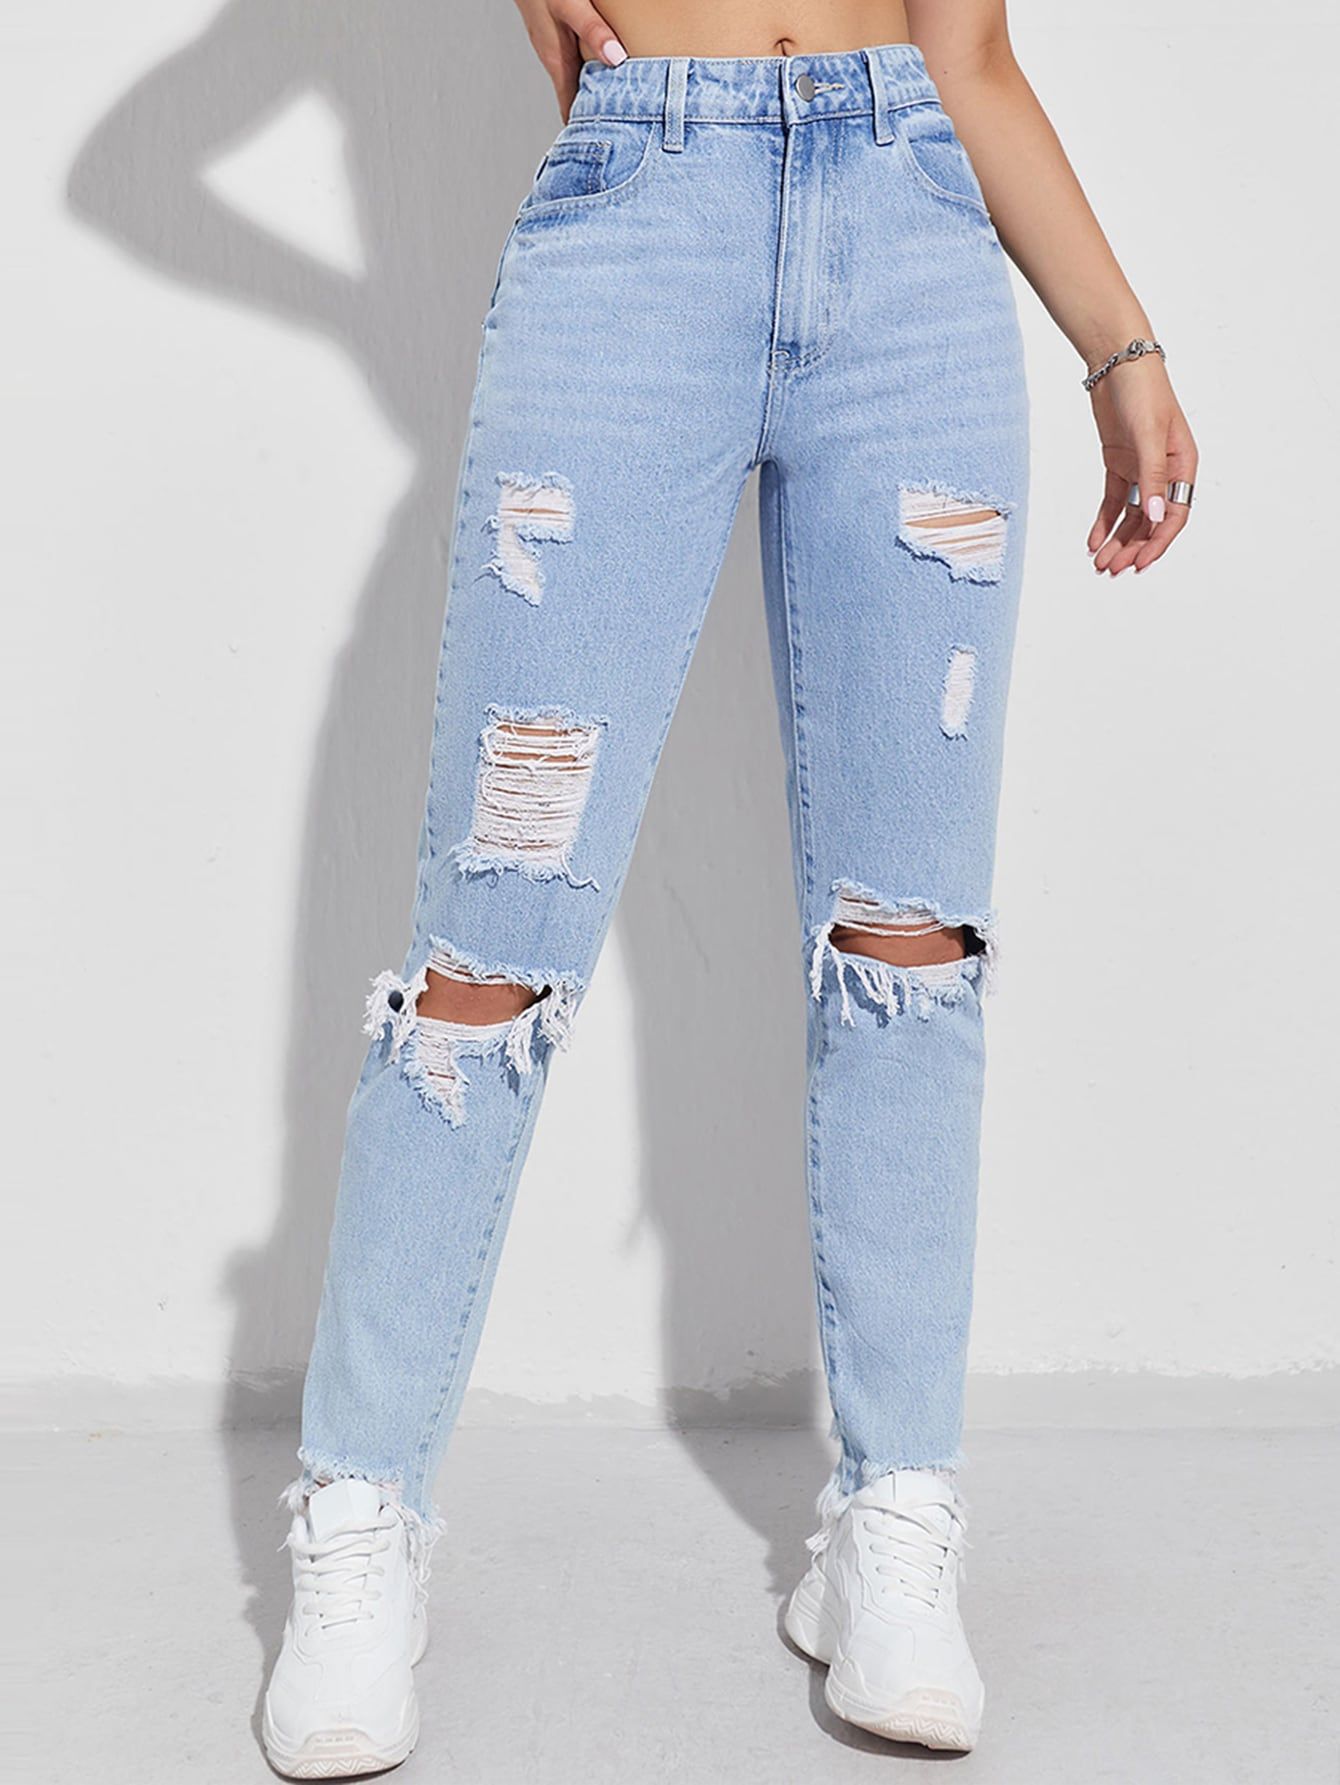 How to Wear Ripped Mom Jeans: Top 13 Rough & Stylish Outfit Ideas for Ladies